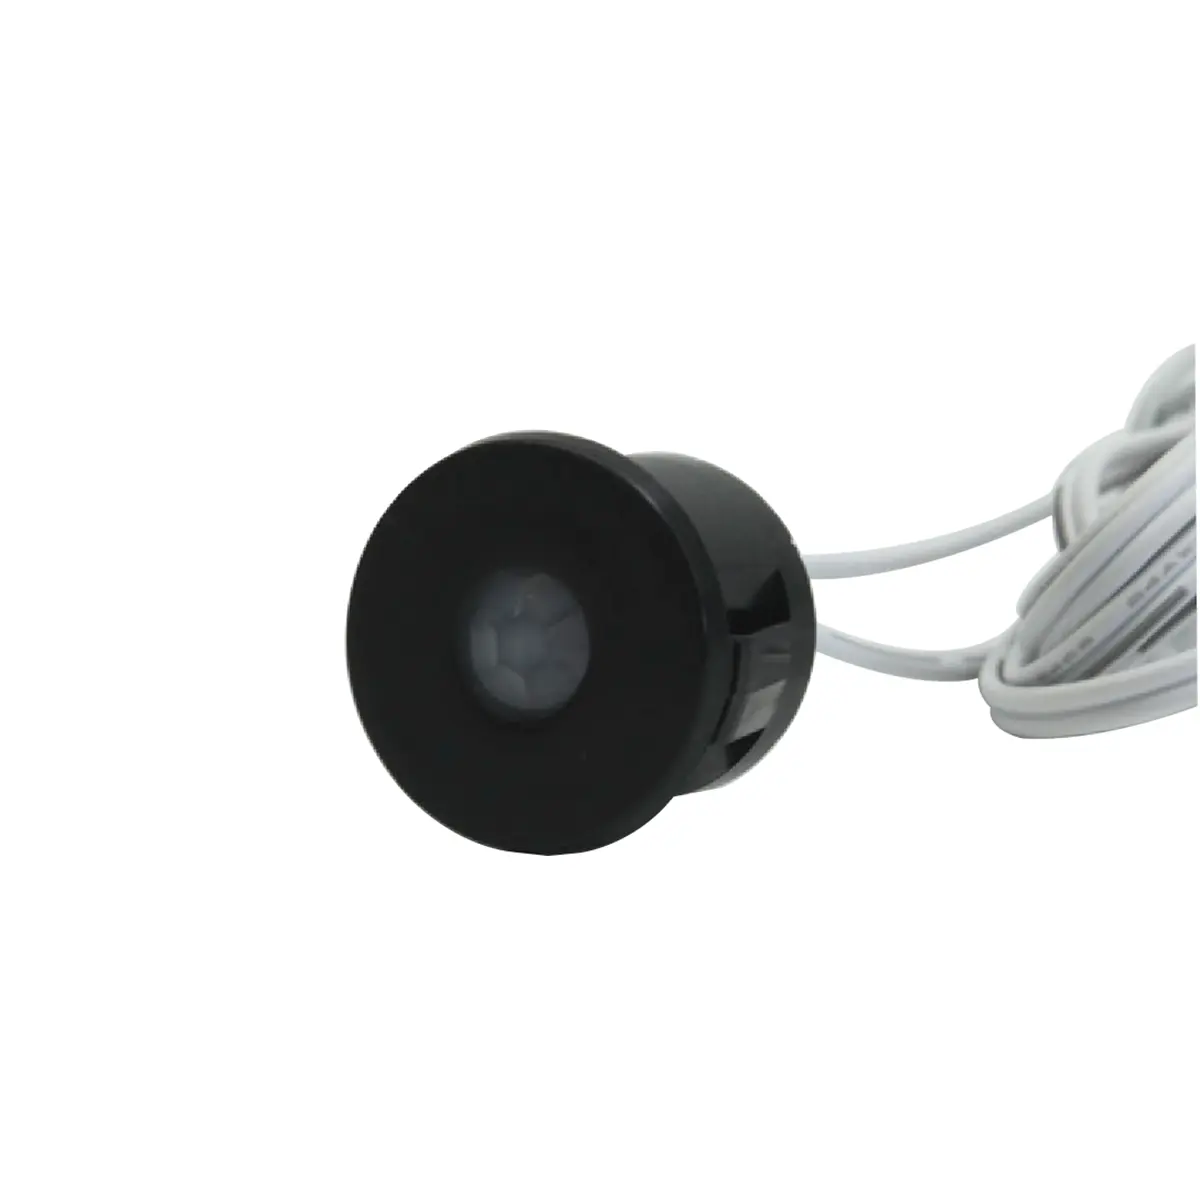 Centro Comercial bedded otion ensensor Witch para Cabinet ight PR ootion ensensor